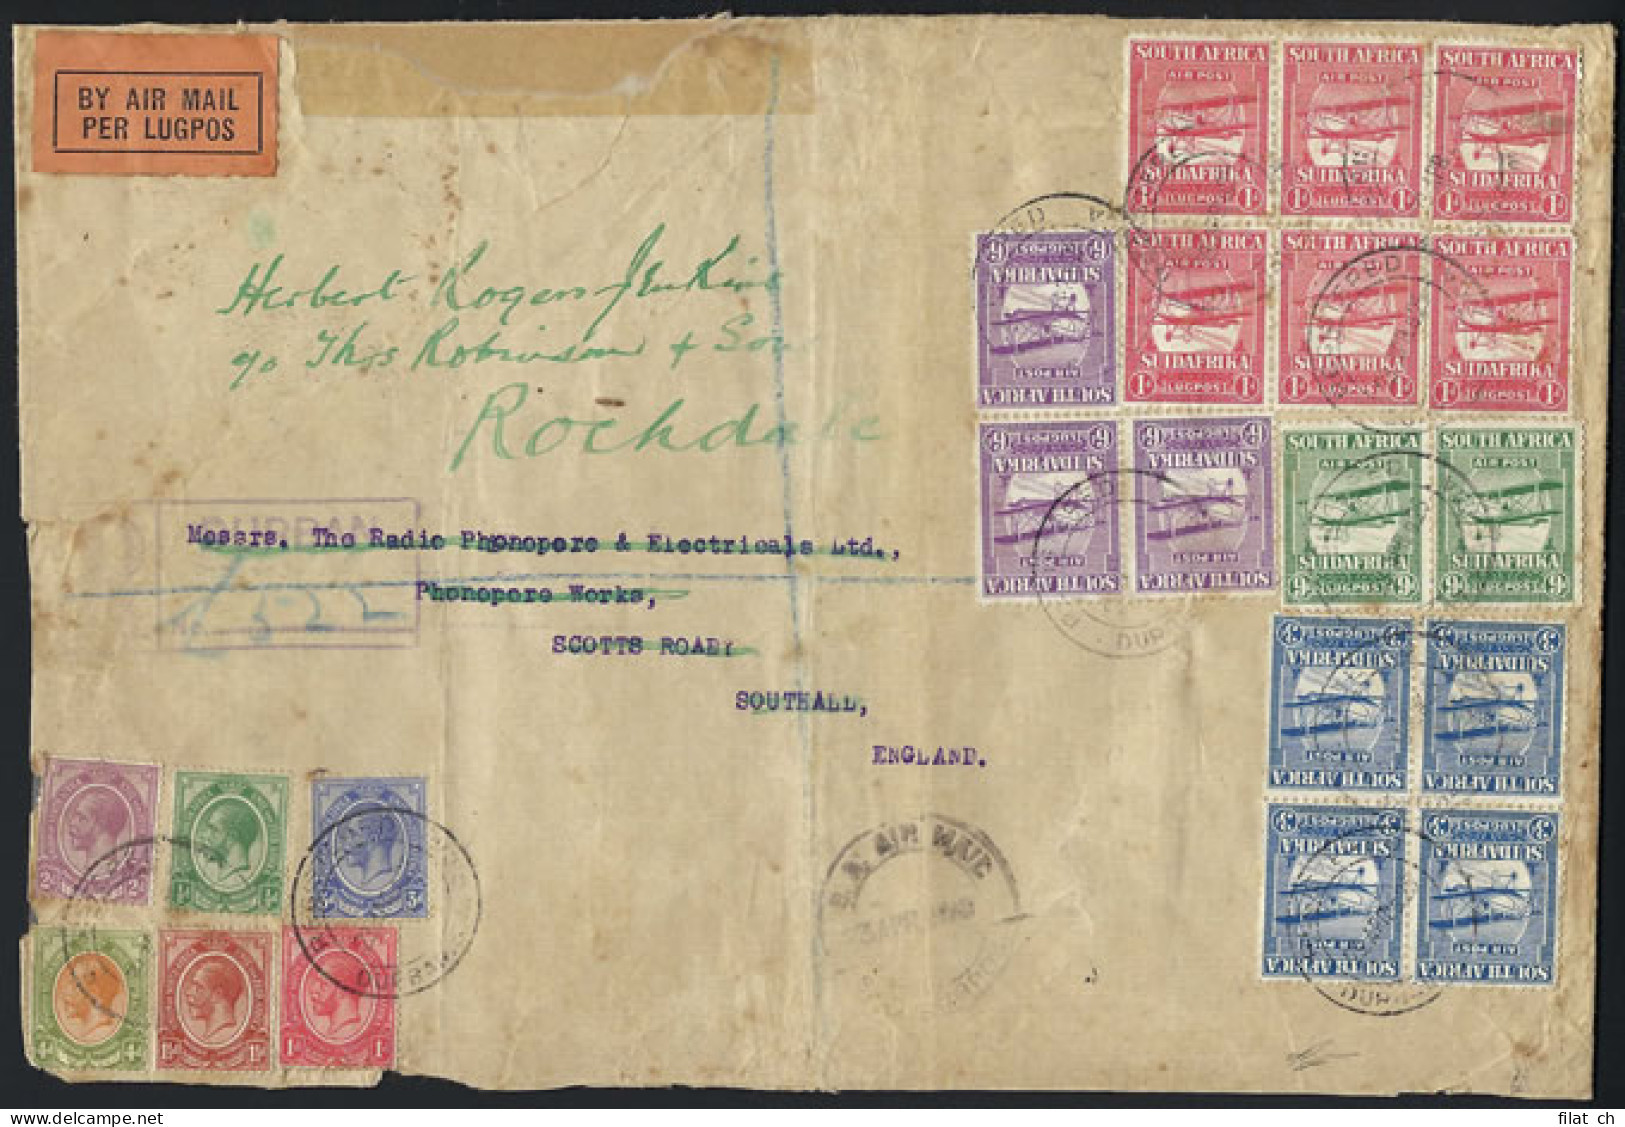 South Africa 1925 Airs Spectacular Multiple Franking, Commercial - Airmail